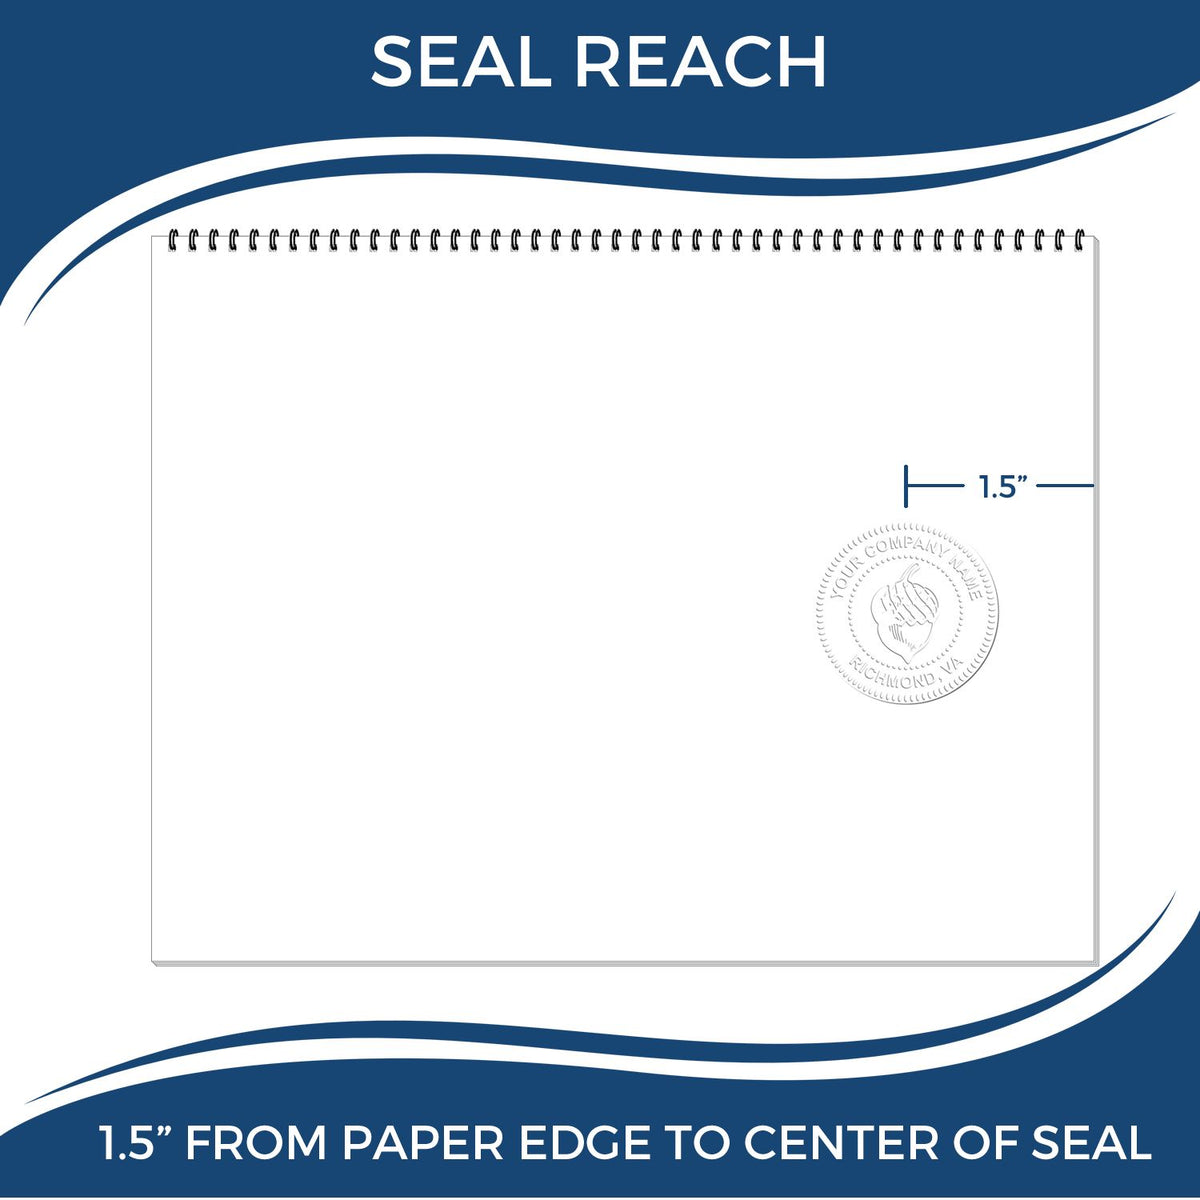 An infographic showing the seal reach which is represented by a ruler and a miniature seal image of the Hybrid District of Columbia Landscape Architect Seal